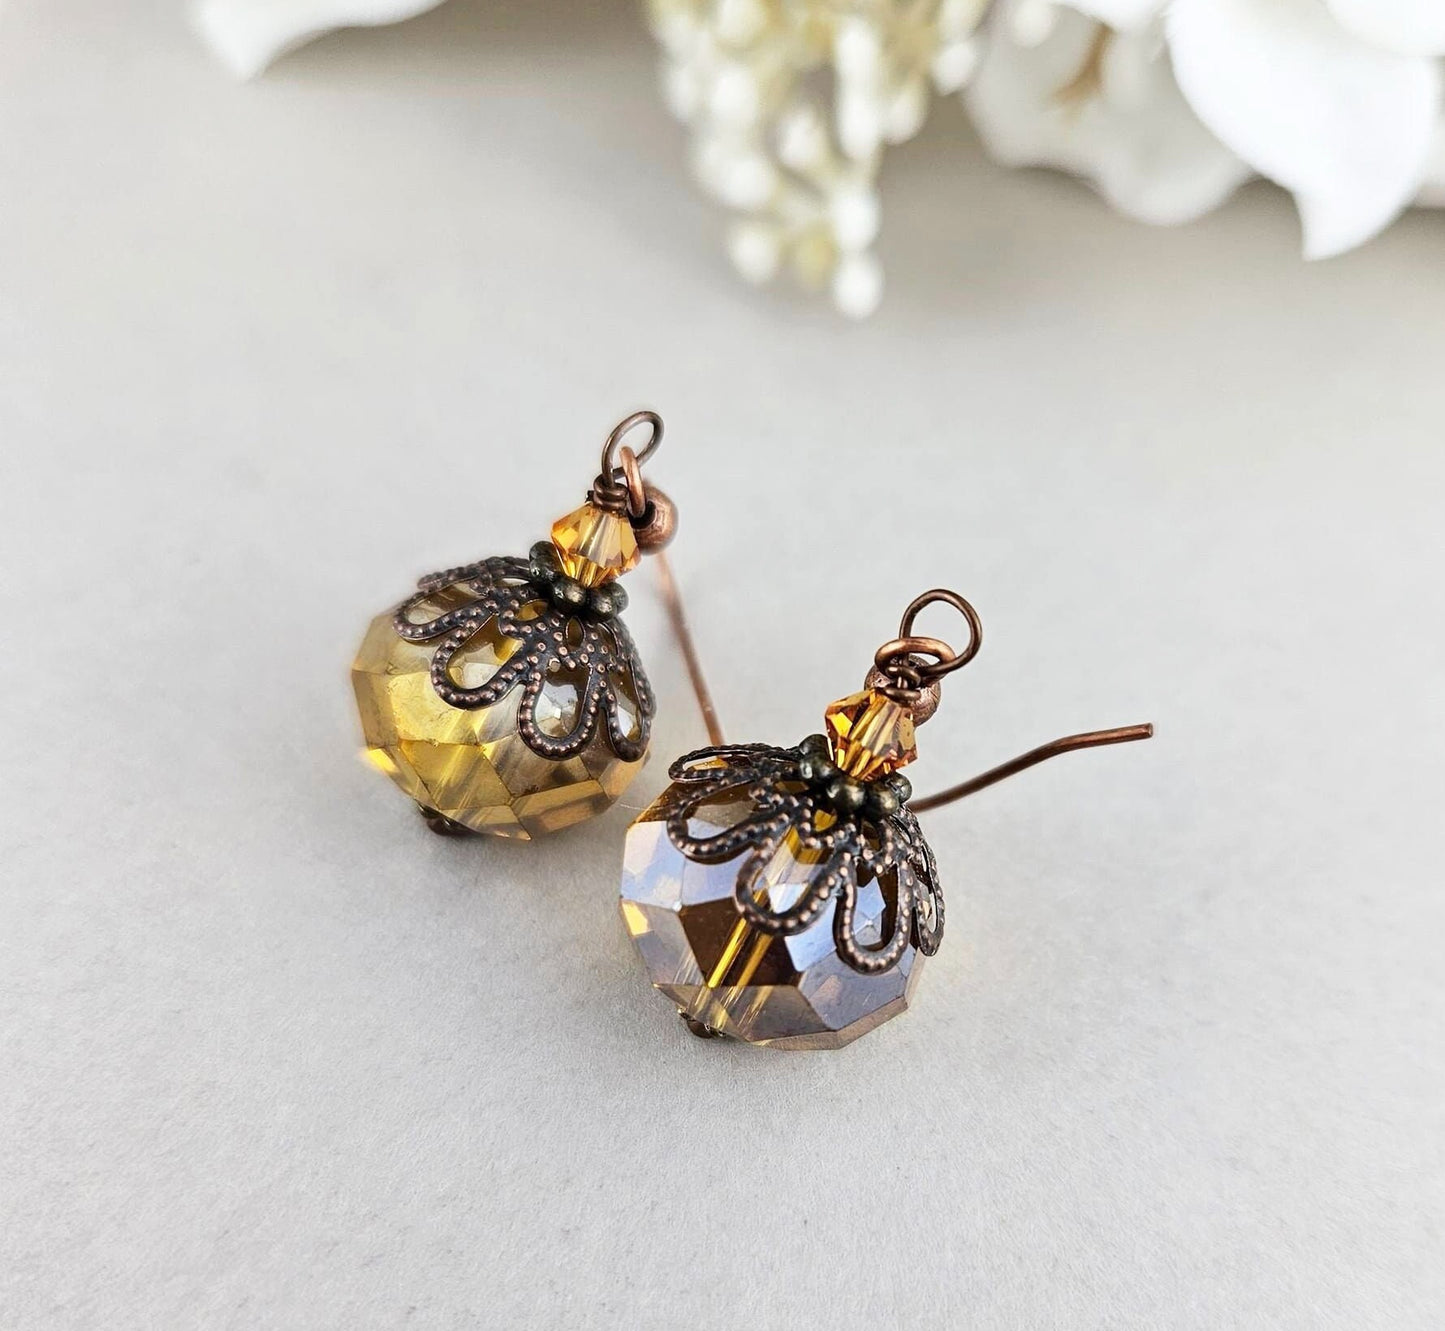 Topaz Dangle Drop Earrings, Vintage Inspired Beaded Glass Jewelry, Gift for Her